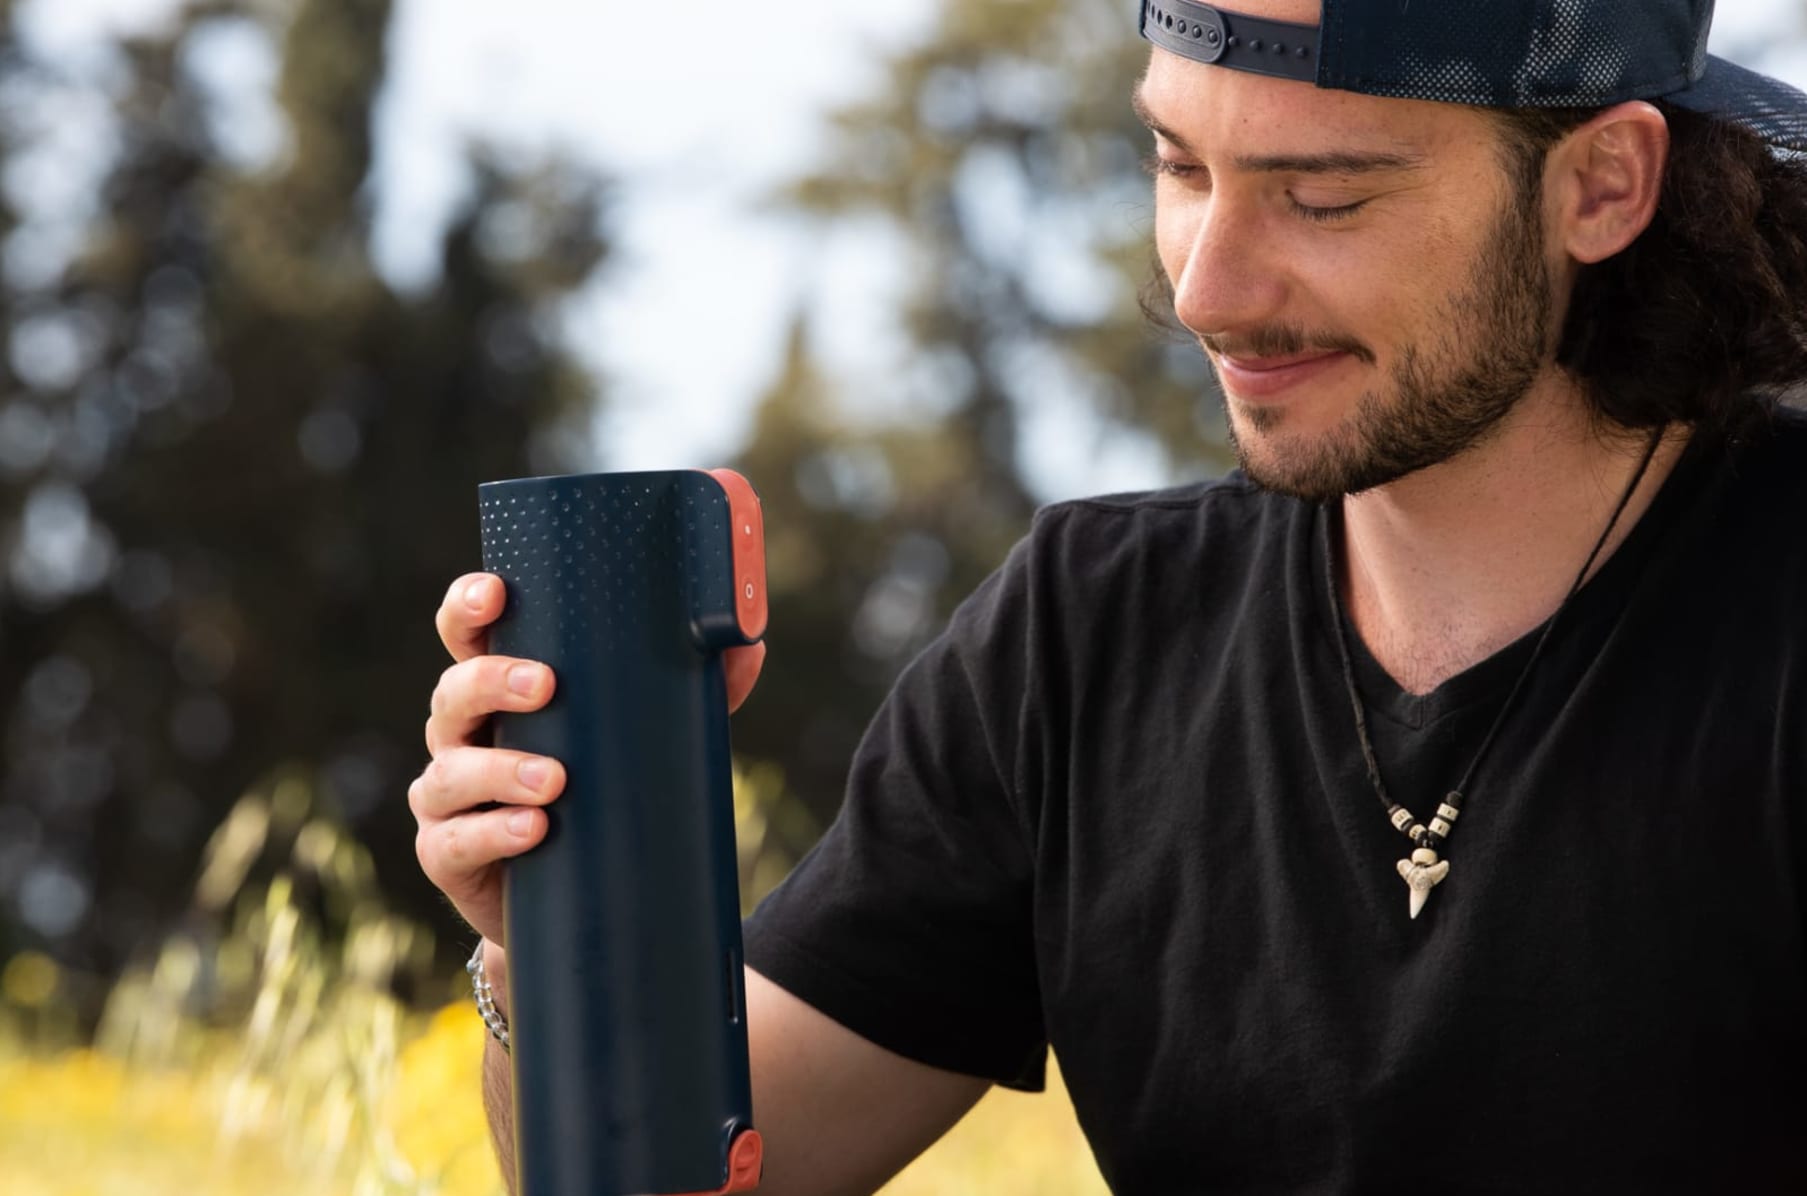 Kimos Is The “World's First Self-heating Thermos That Boils Water